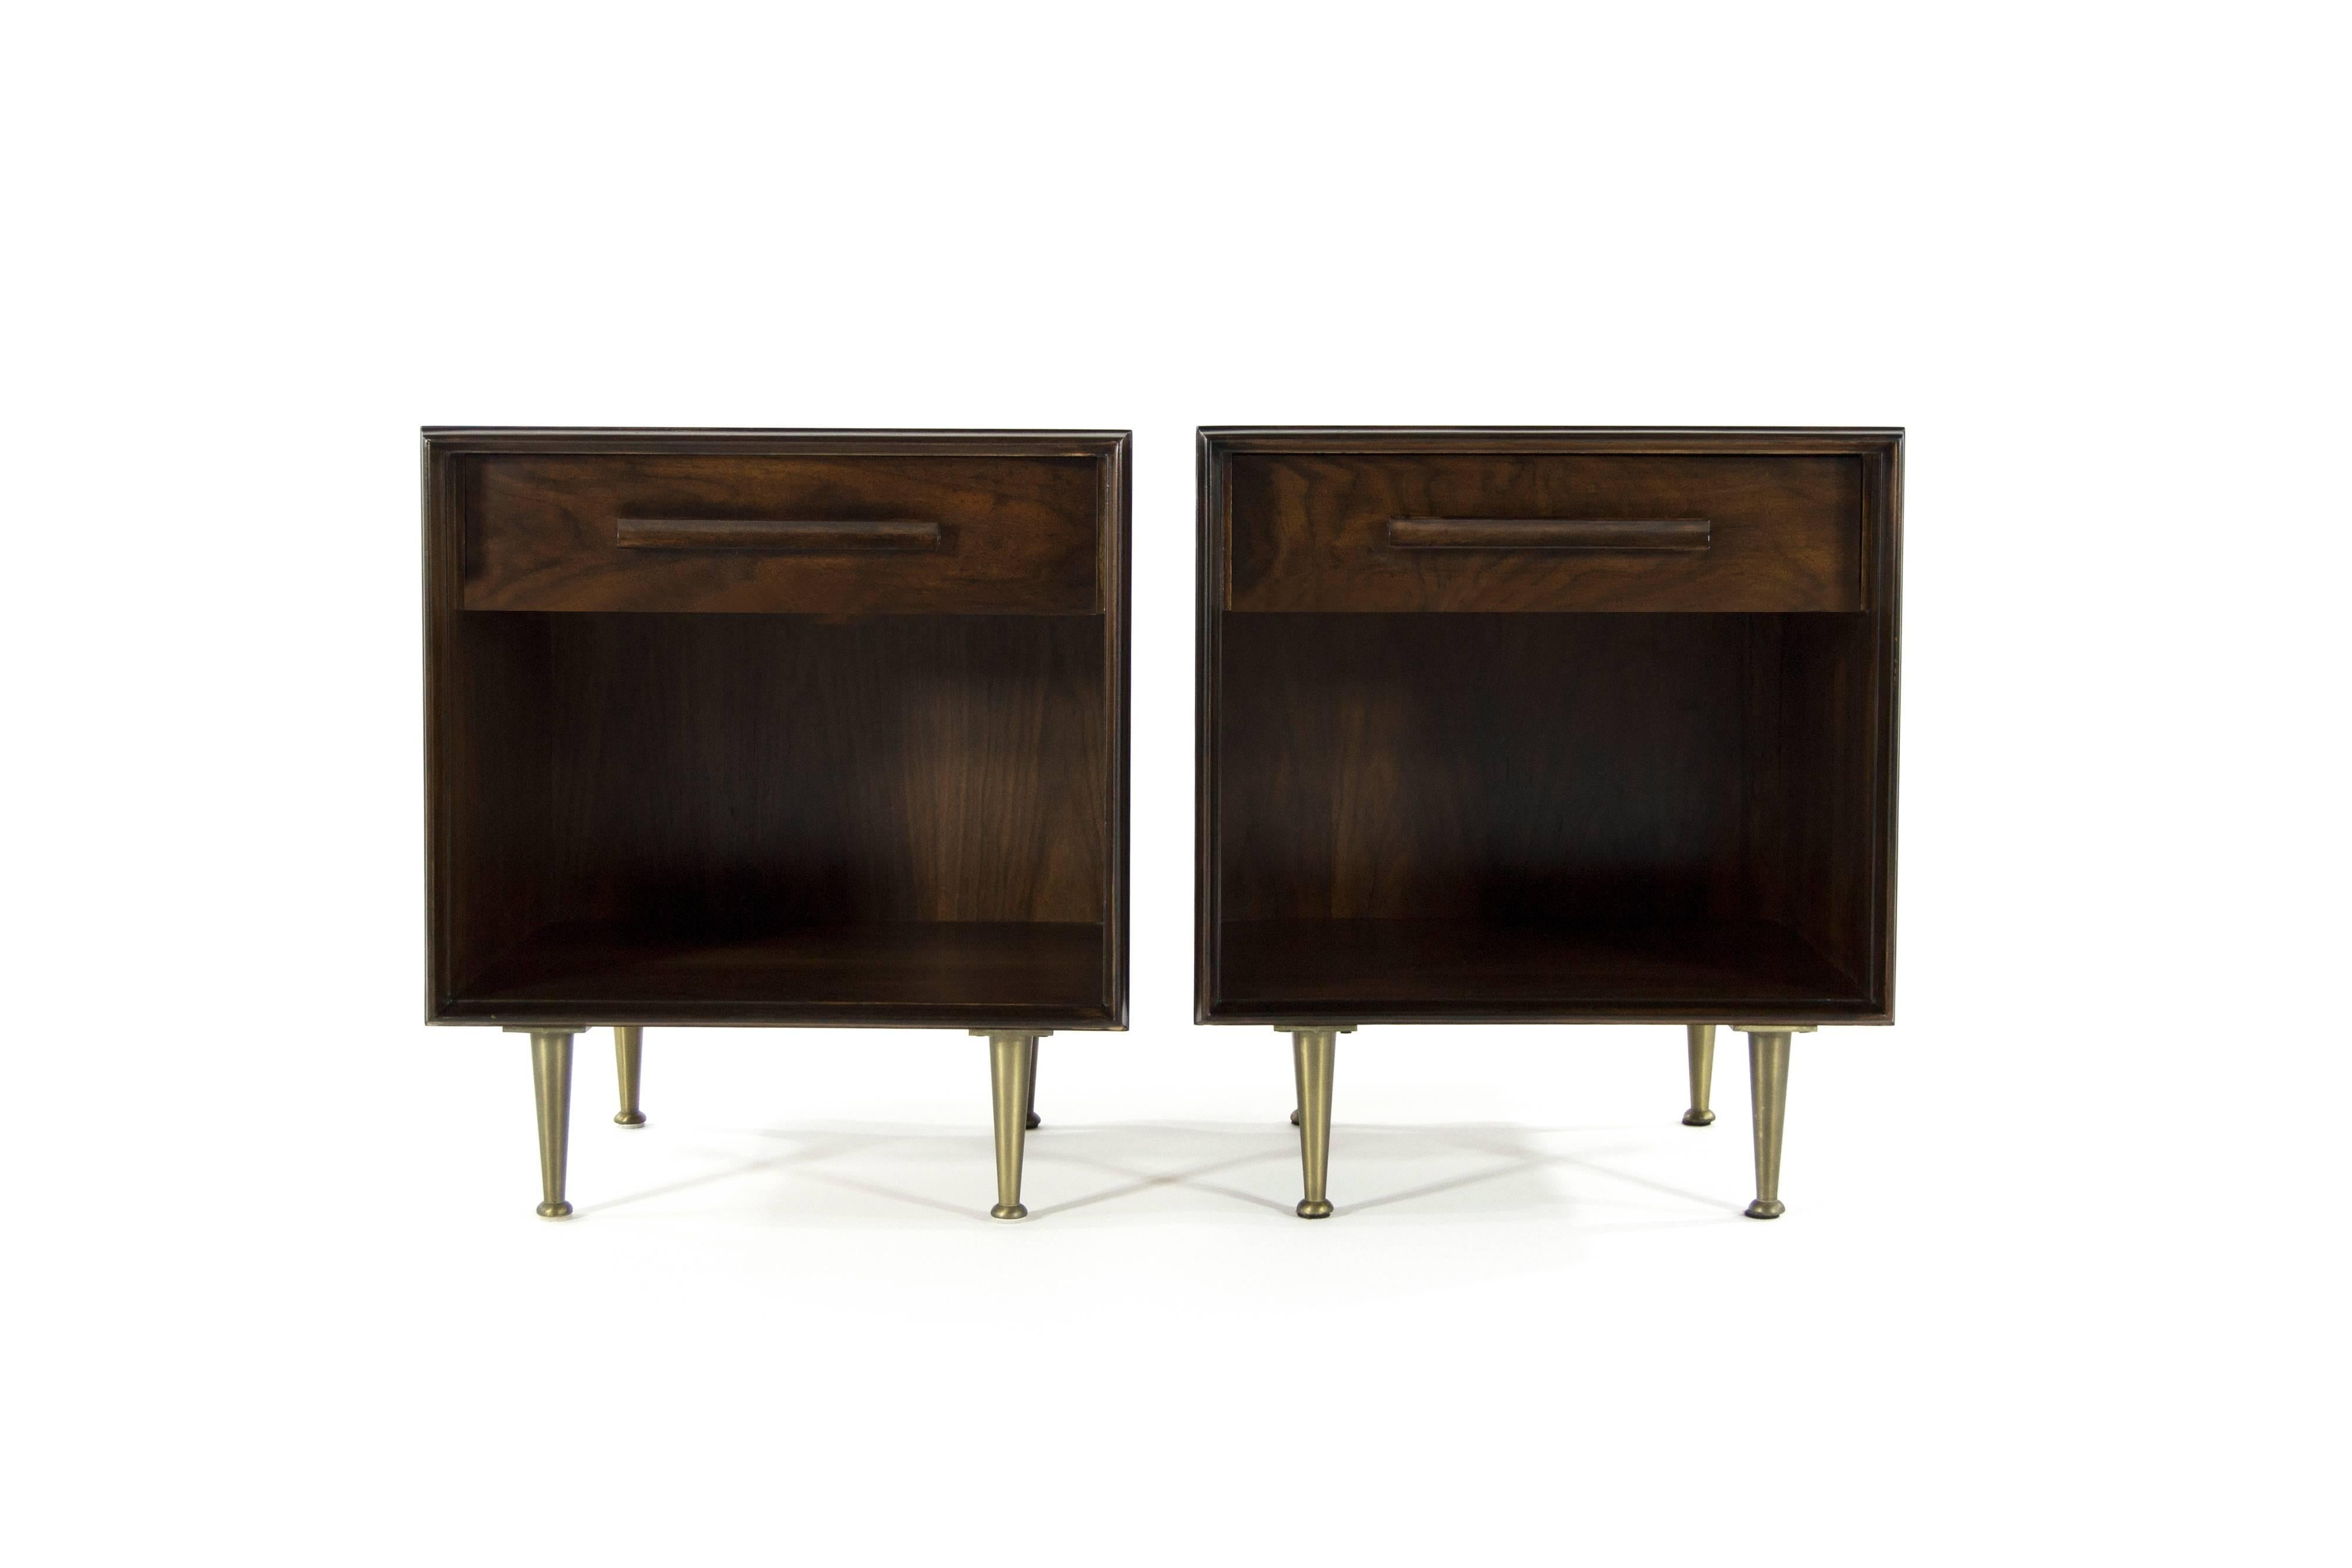 Exquisite pair of walnut nightstands or end tables by T.H. Robsjohn-Gibbings for Widdicomb, circa 1958.

Walnut has been restored to its original finish allowing for the wood grain to present beautifully. Original brushed brass legs in excellent